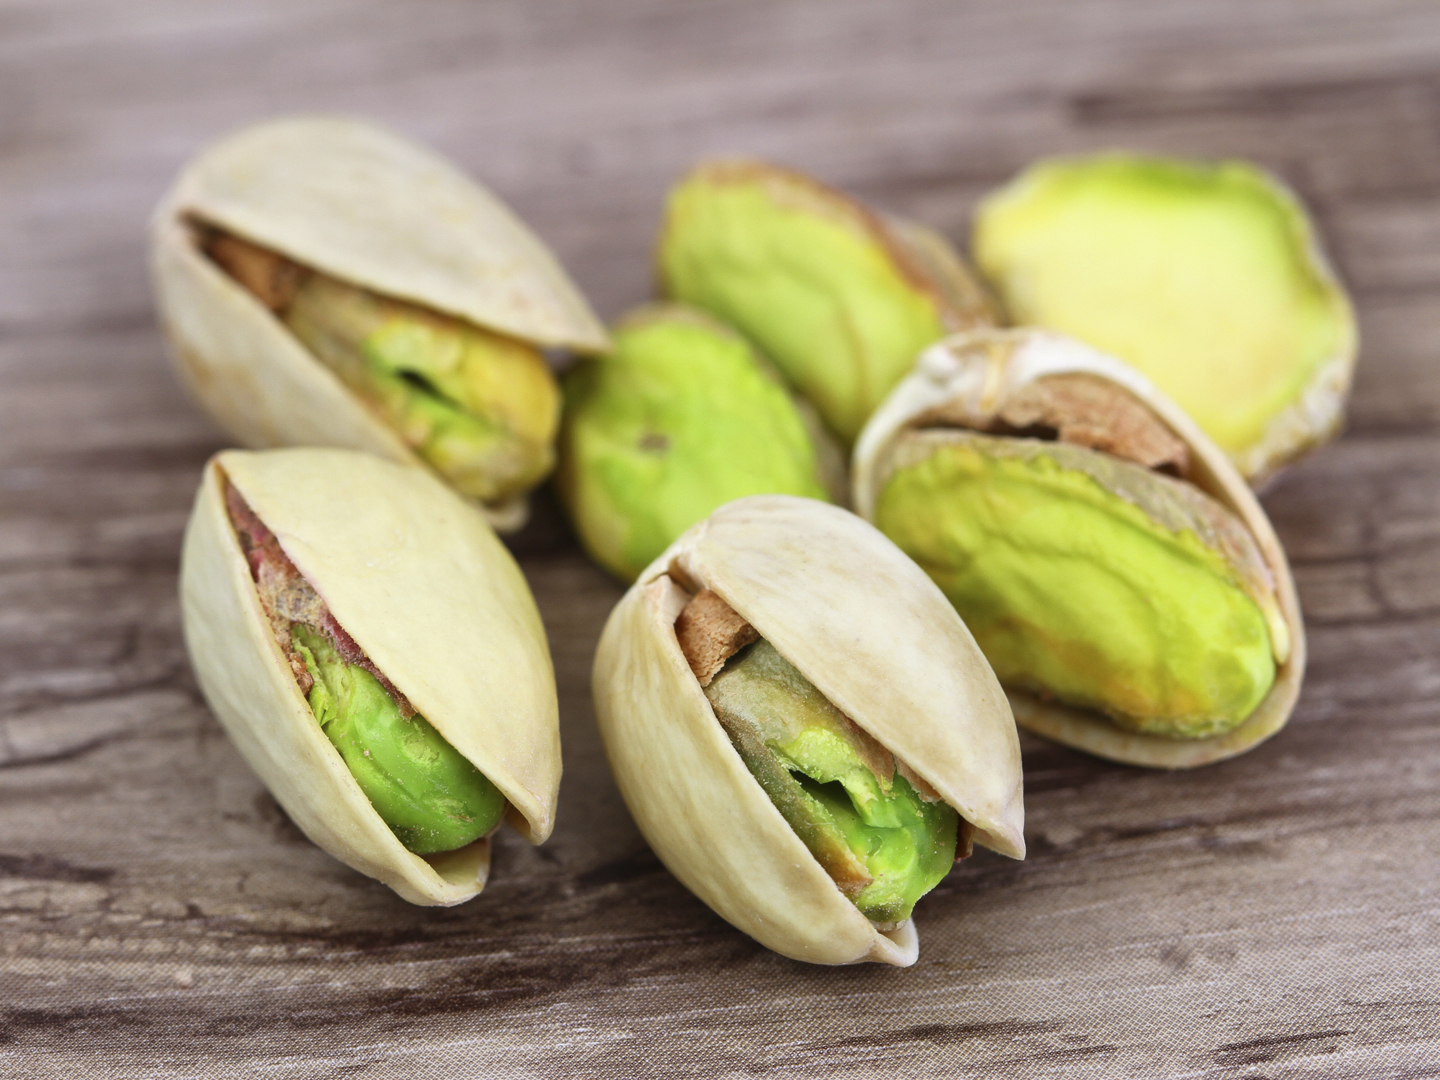 Iran’s Pistachios Import to UAE / Nuts and Kernels